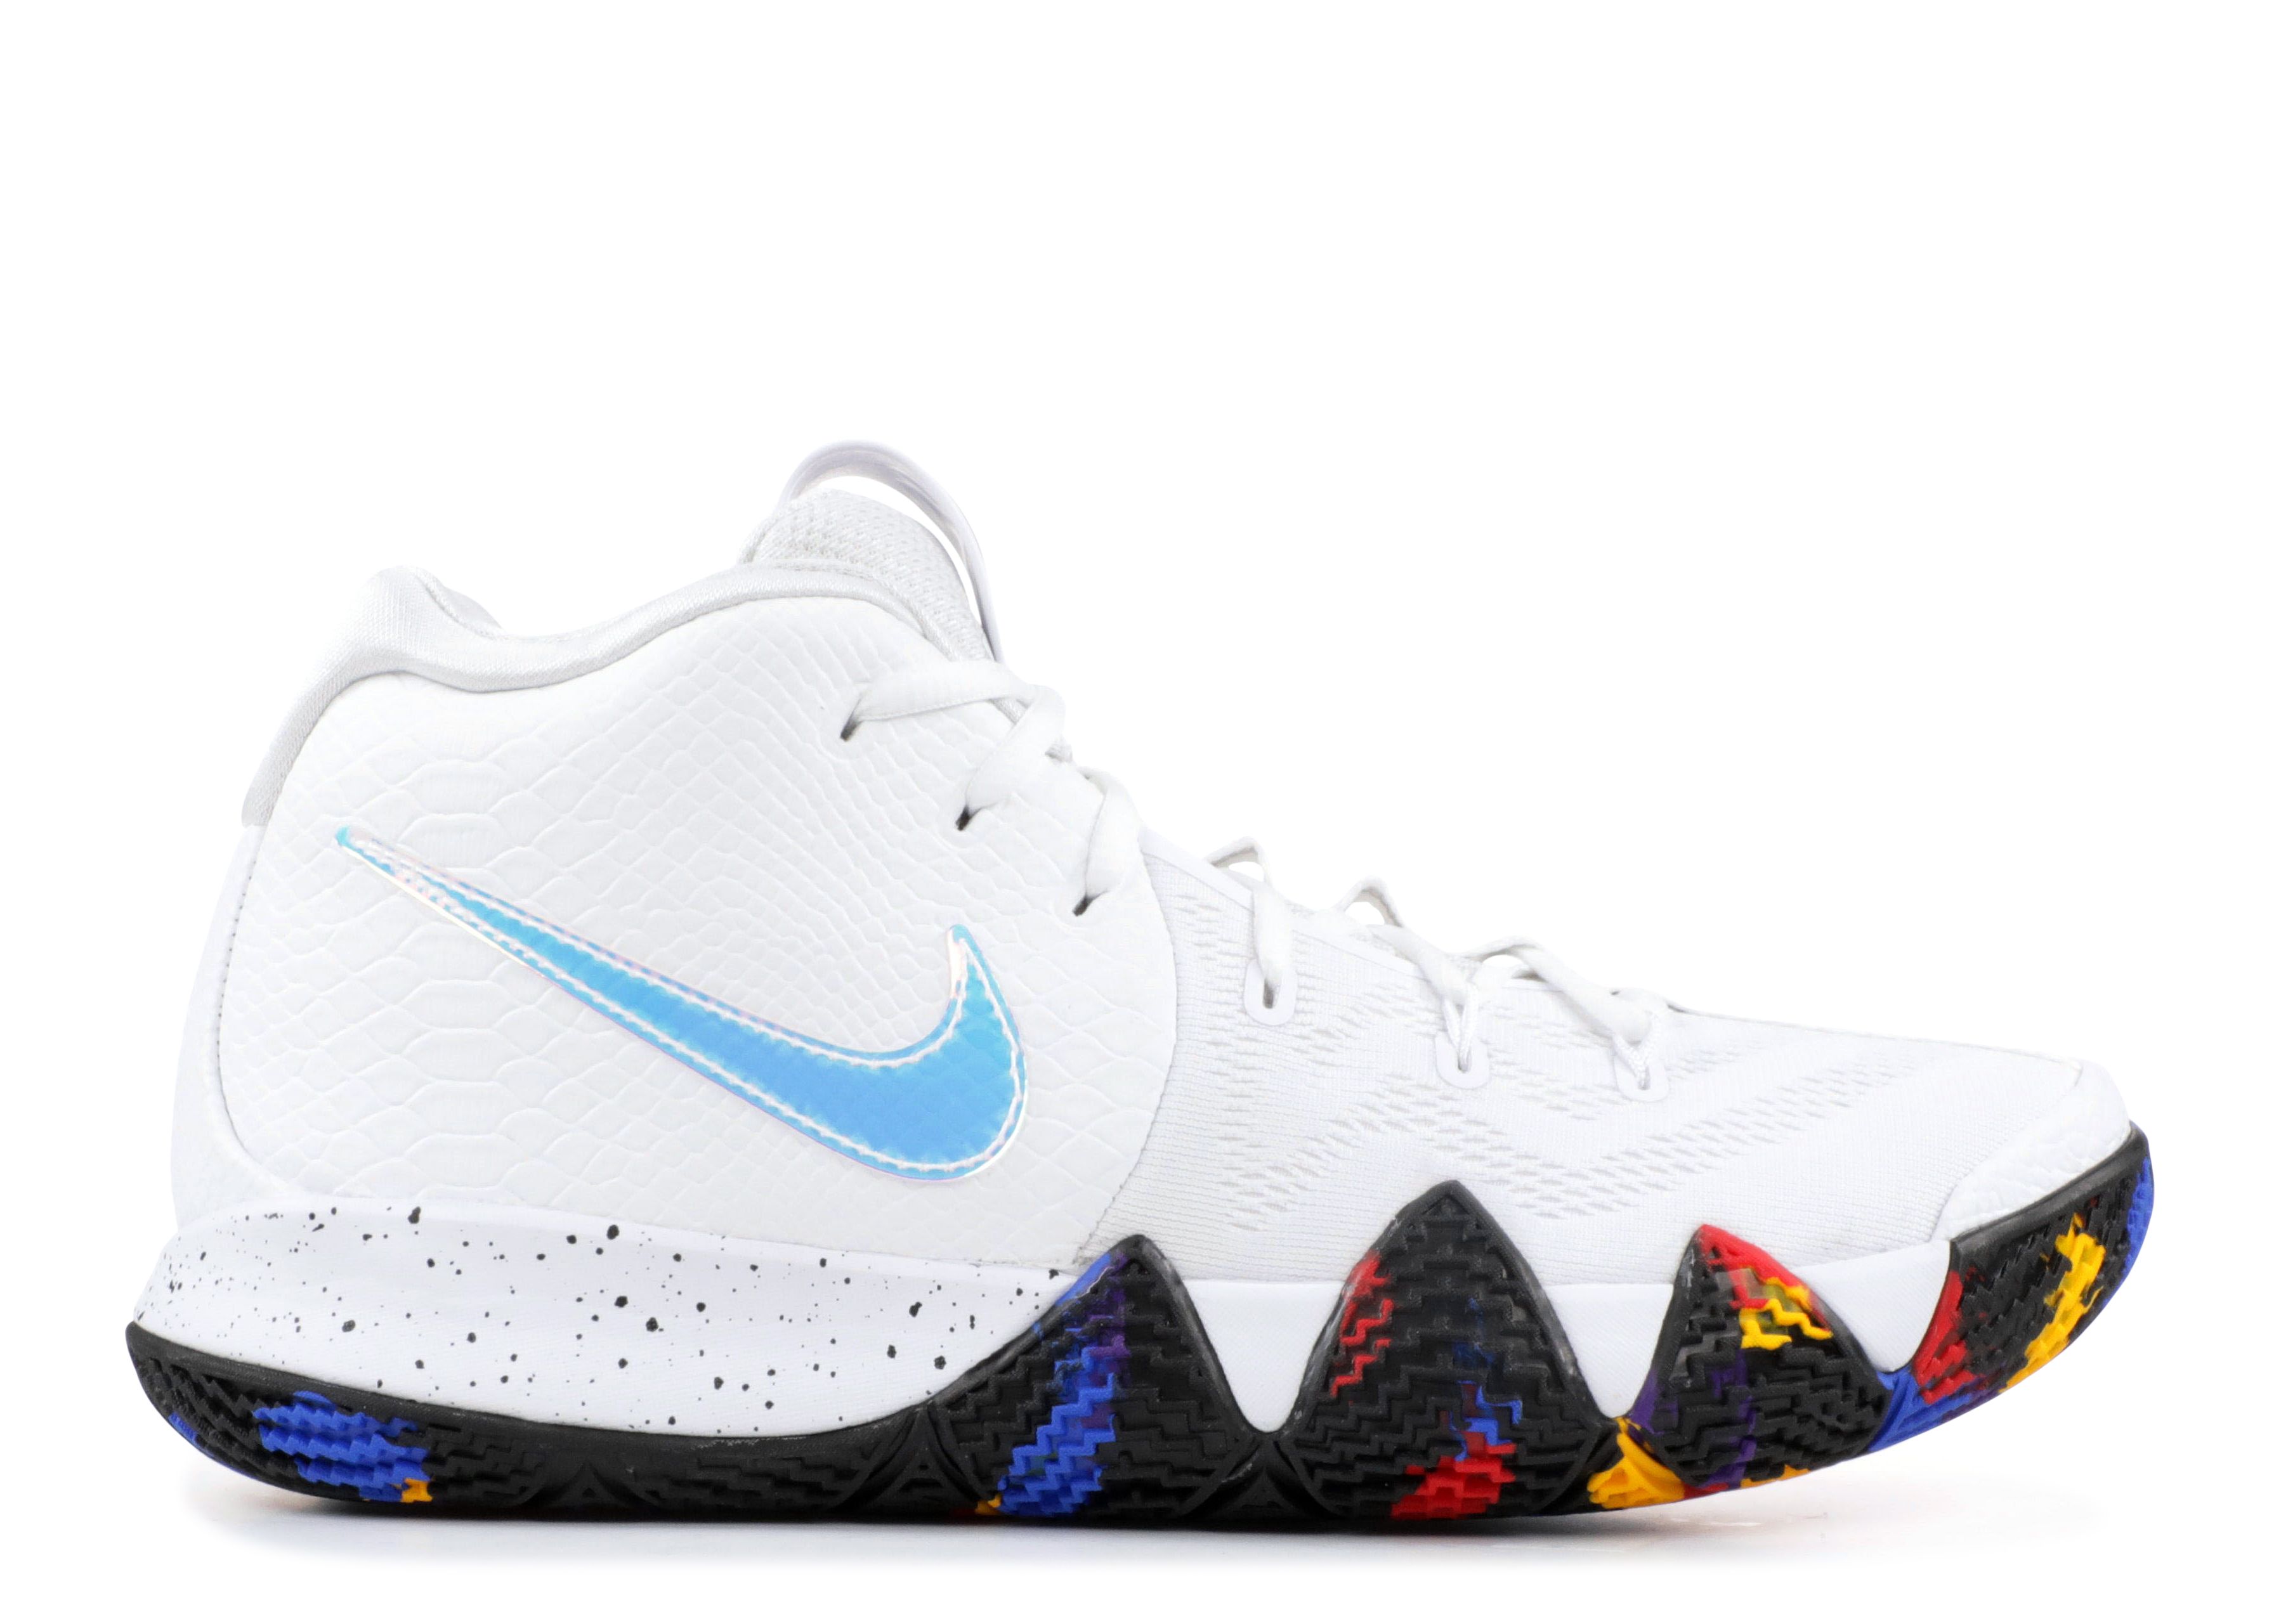 kyrie 4 latest shoes